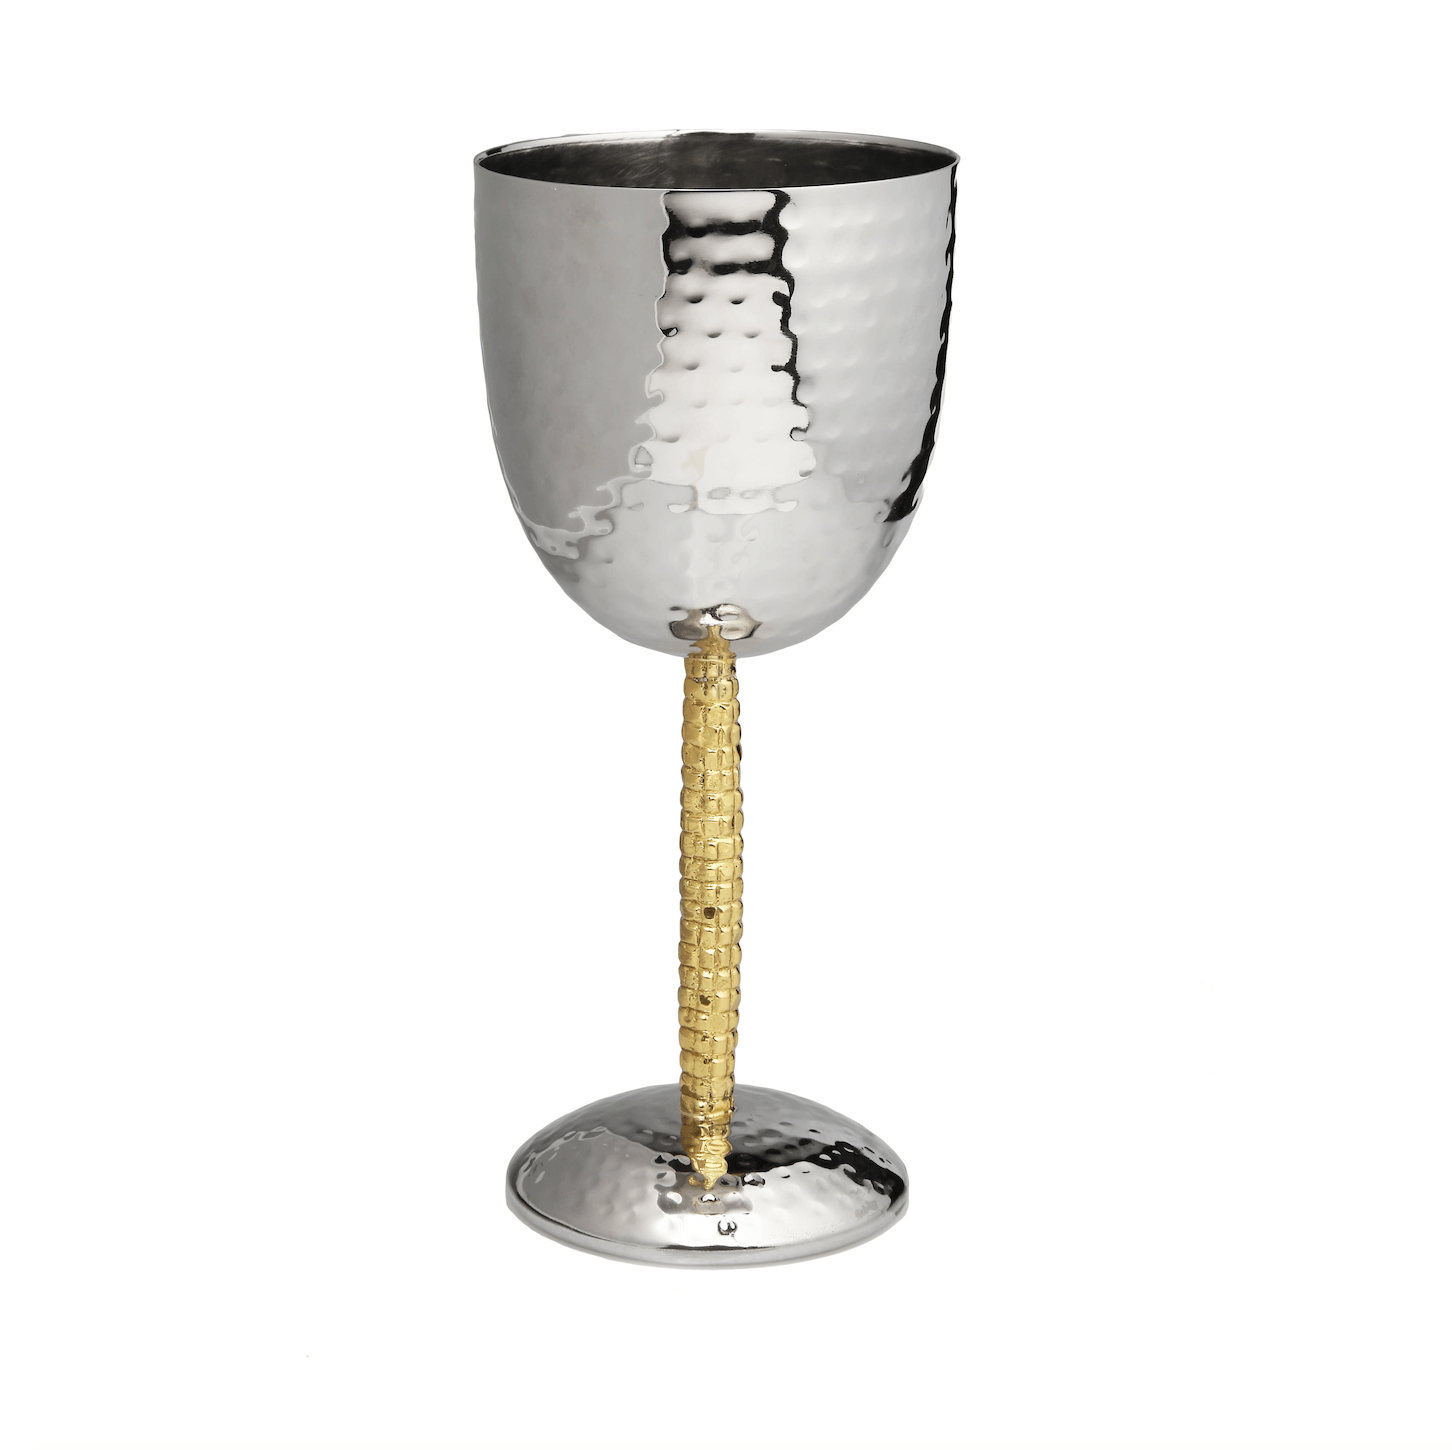 Classic Touch Decor Kiddush Cups Oversized Goblet with Mosaic Design